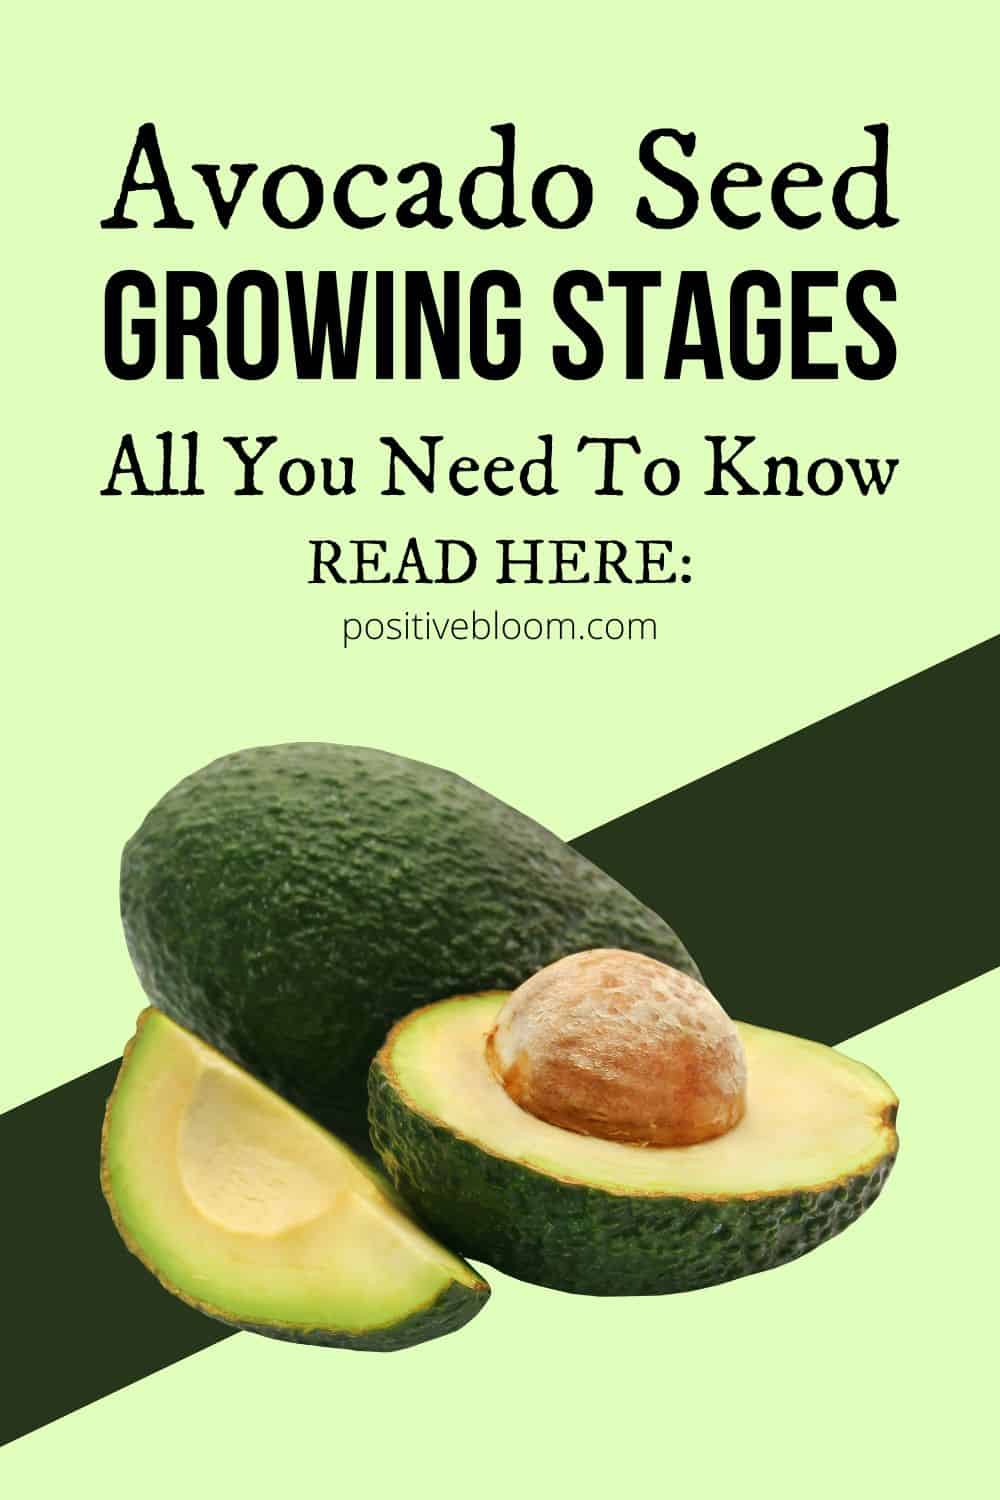 All You Need To Know About The Avocado Seed Growing Stages Pinterest